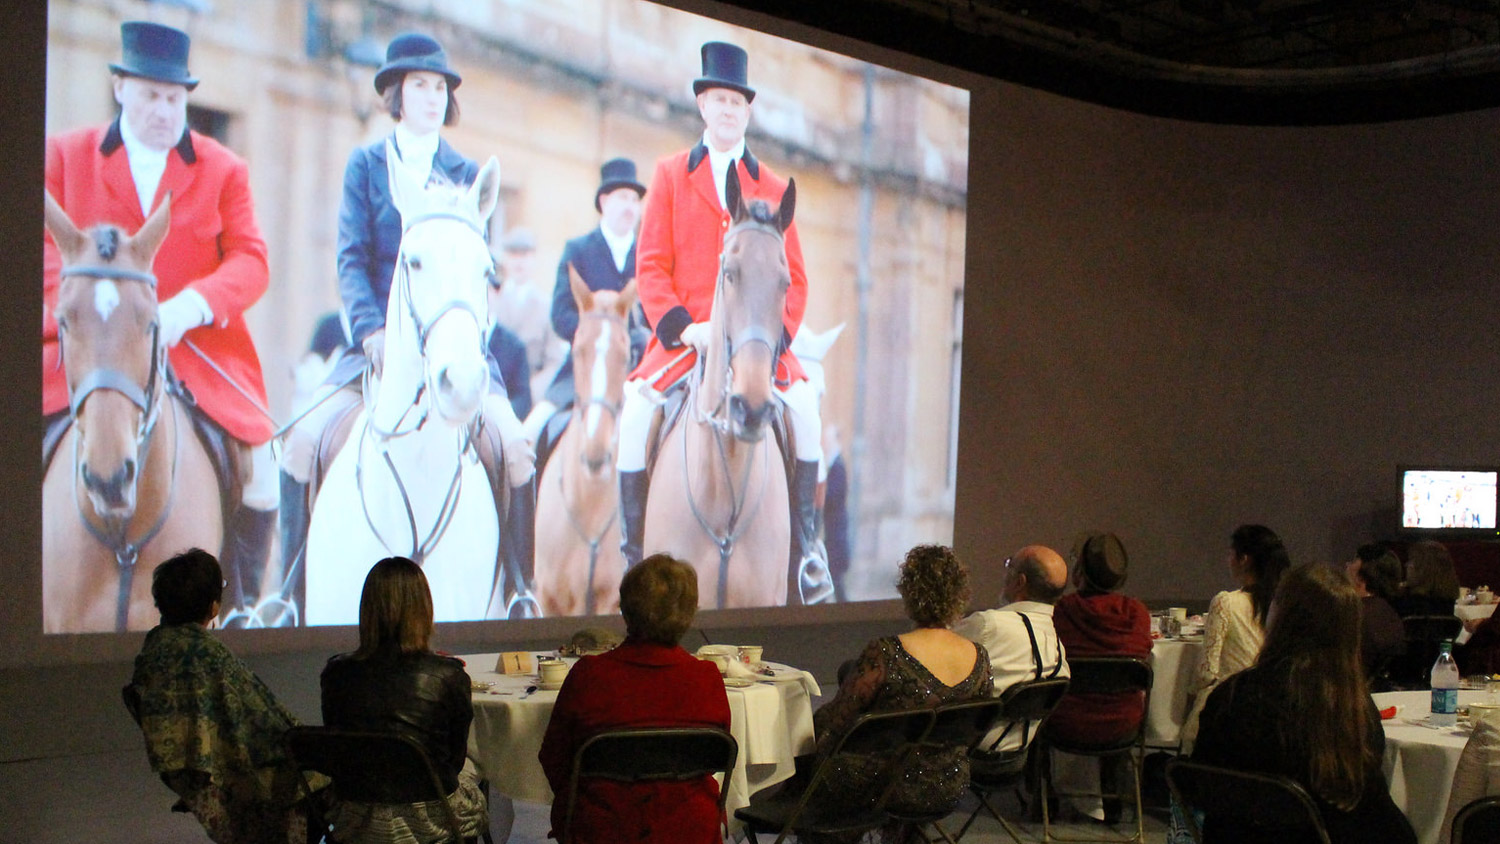 people sitting at round tables watching a large projection of actors on horses